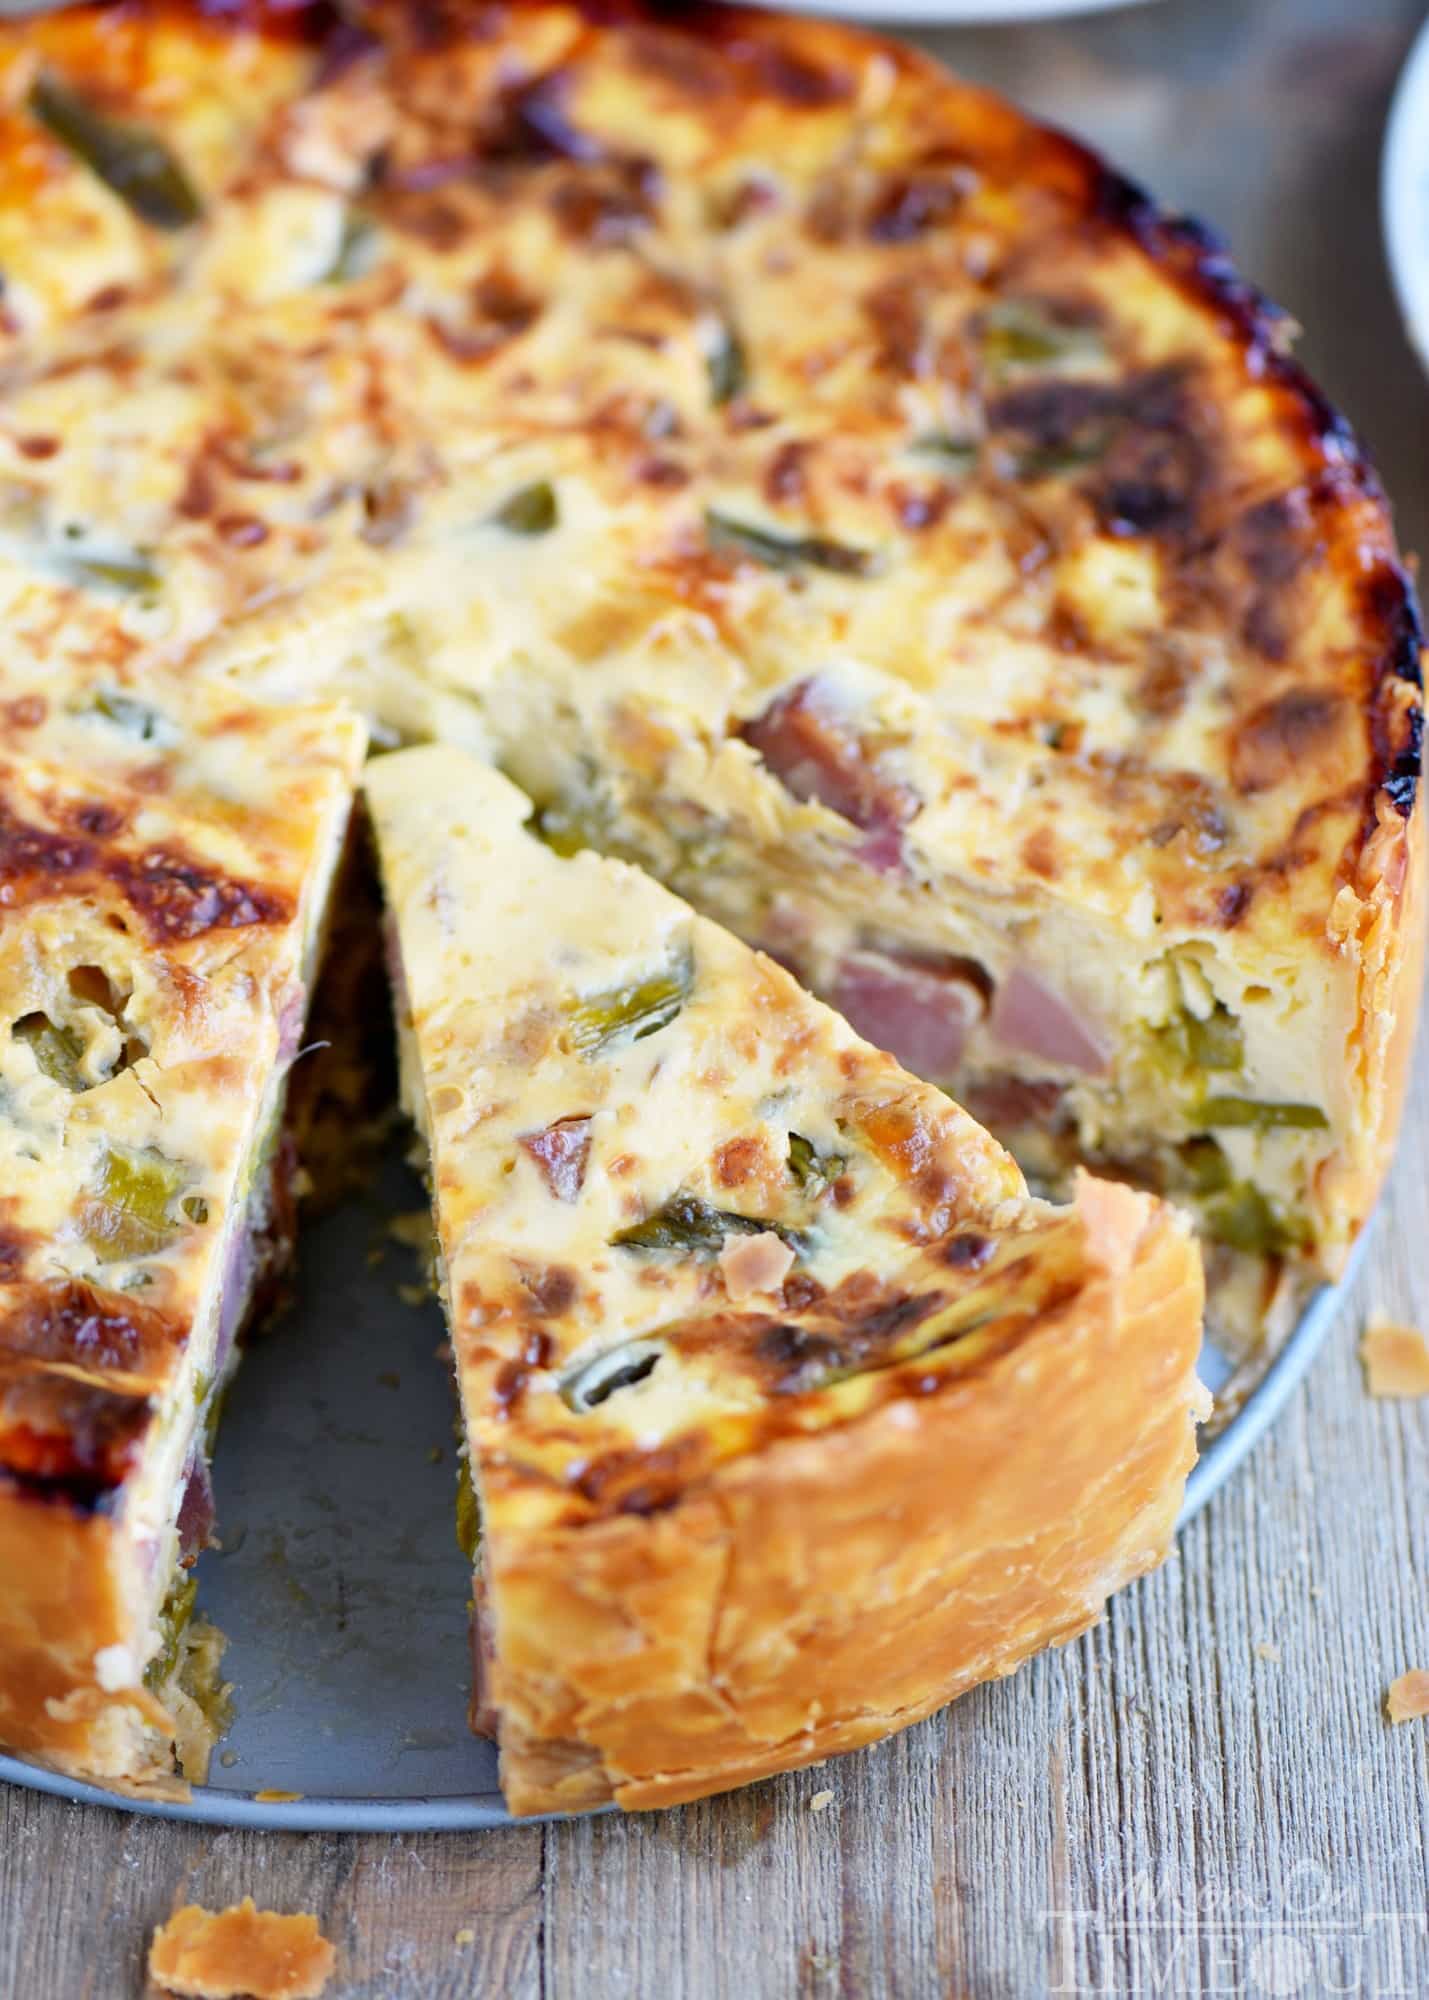 This Deep Dish Ham and Asparagus Quiche with caramelized onions is the perfect addition to your holiday brunch menu! Make it the day before and serve cold or room temperature - both ways are delicious! Also makes a hearty dinner! // Mom On Timeout